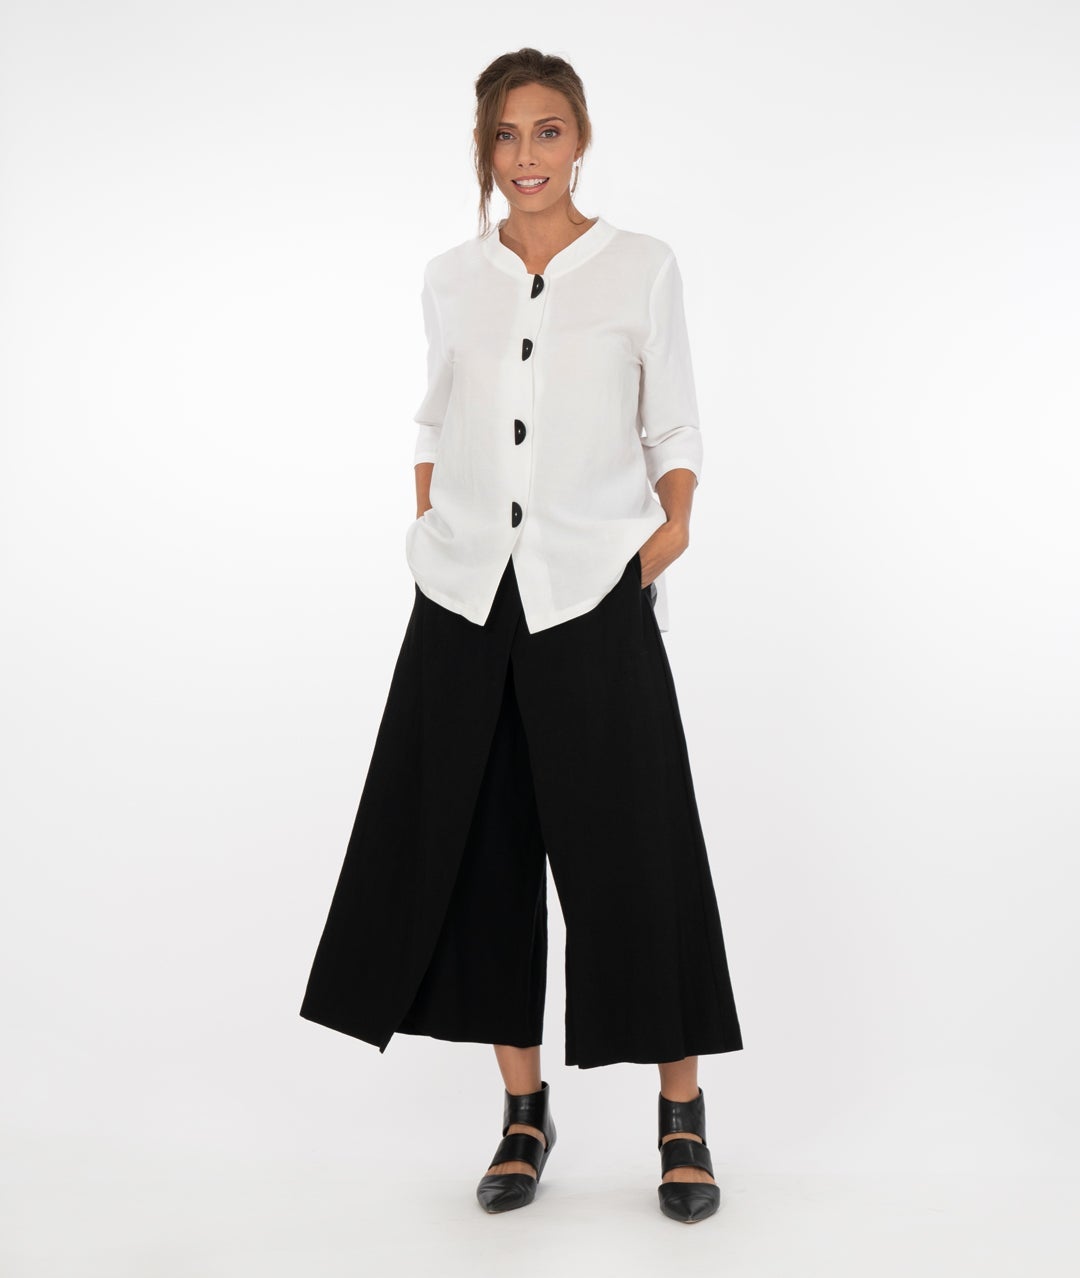 model wearing a white button up top with black pants in front of a white background